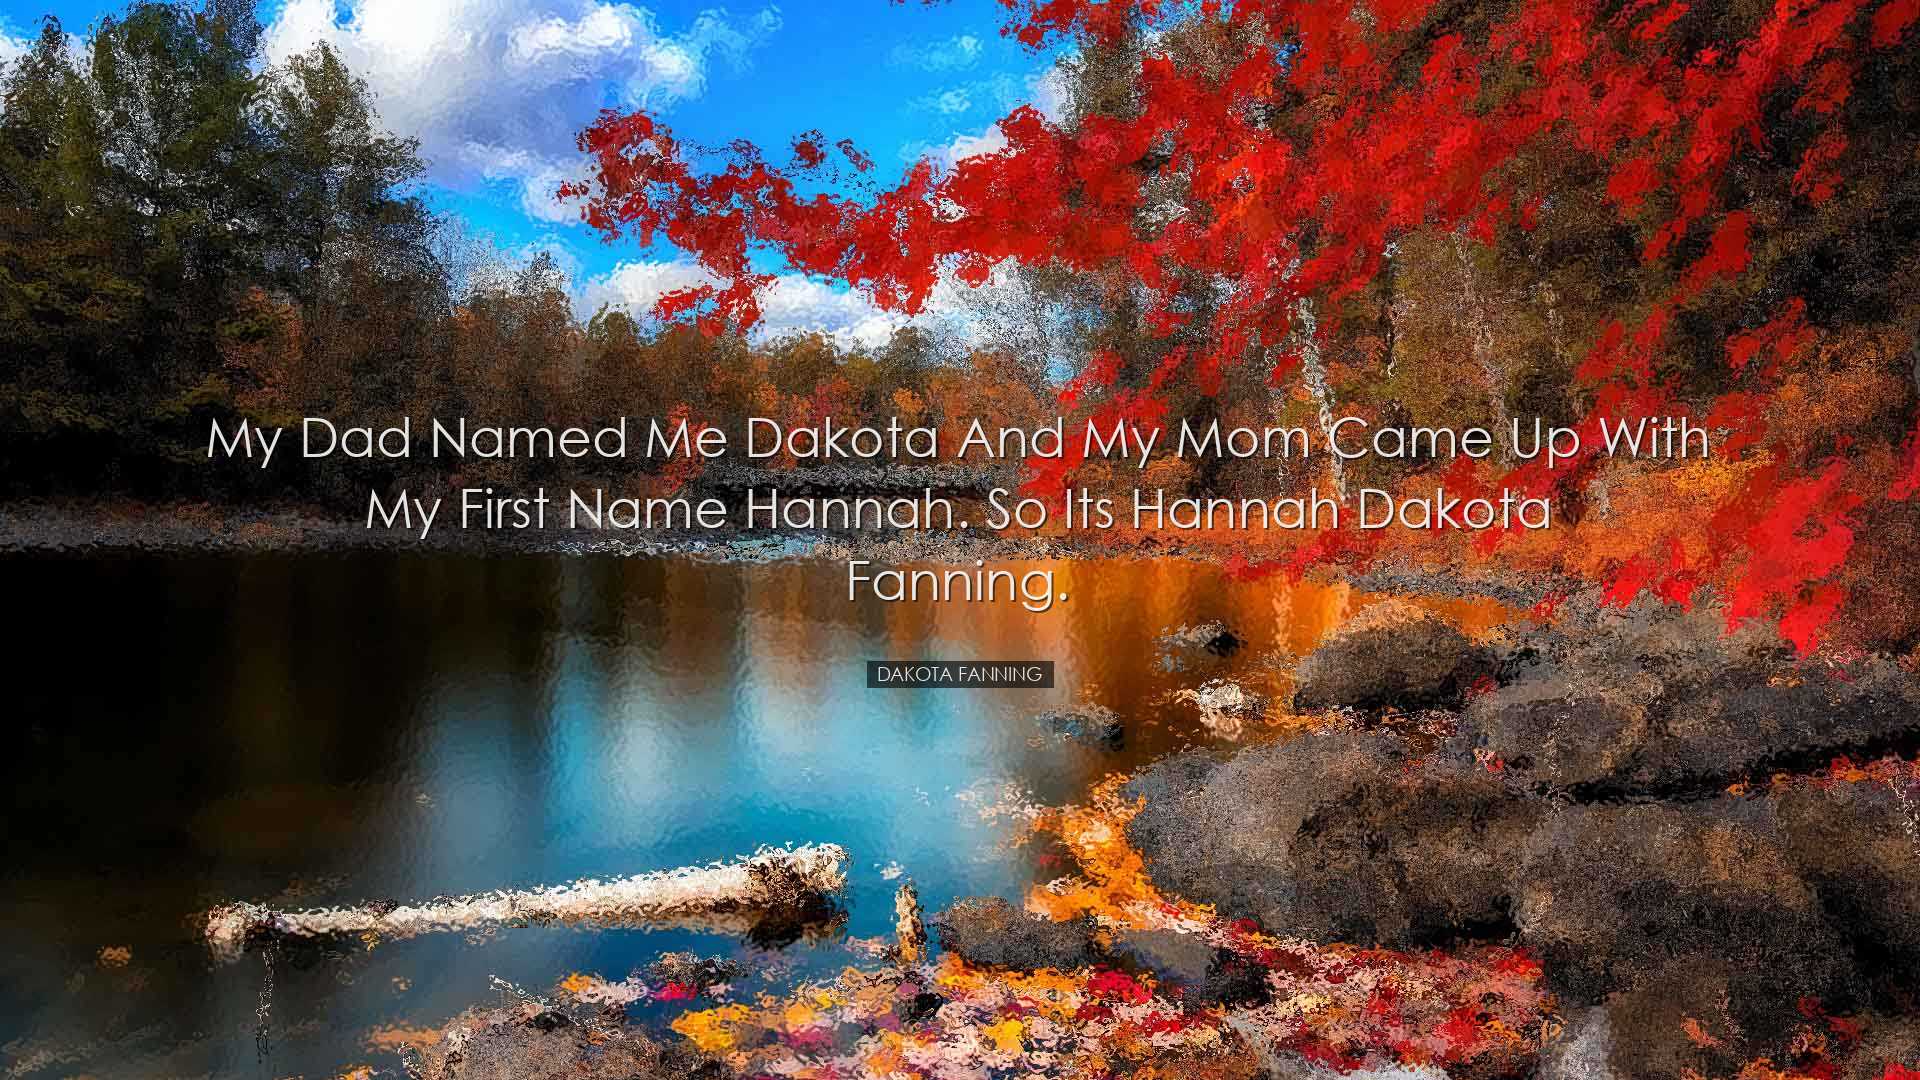 My dad named me Dakota and my mom came up with my first name Hanna